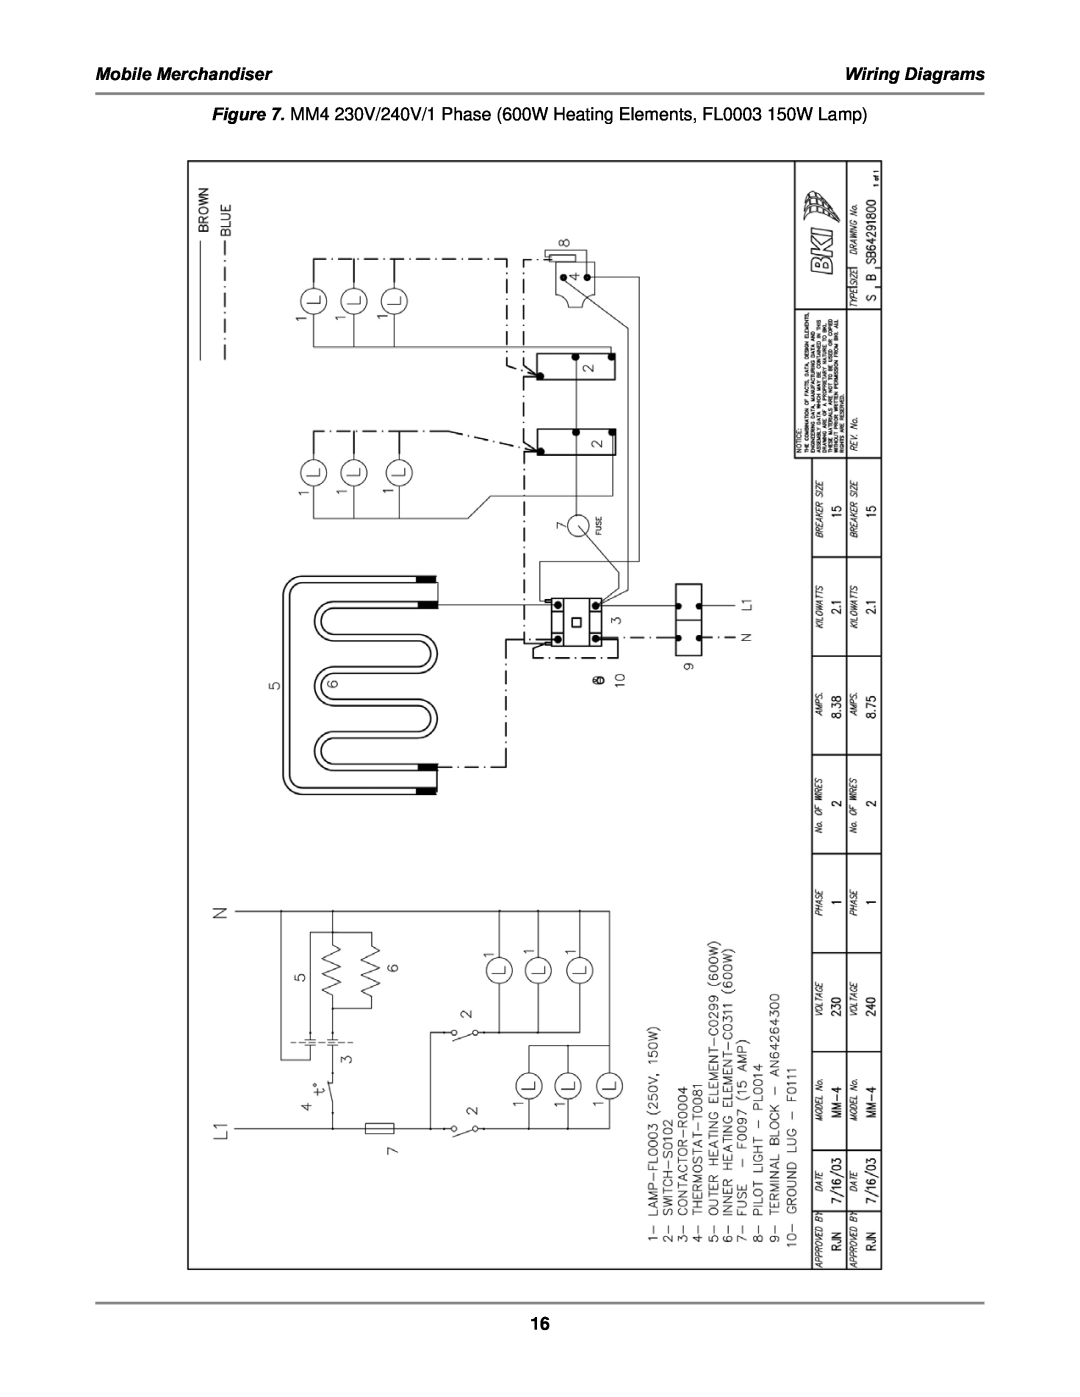 Bakers Pride Oven MM4, MM6 service manual Mobile Merchandiser, Wiring Diagrams 